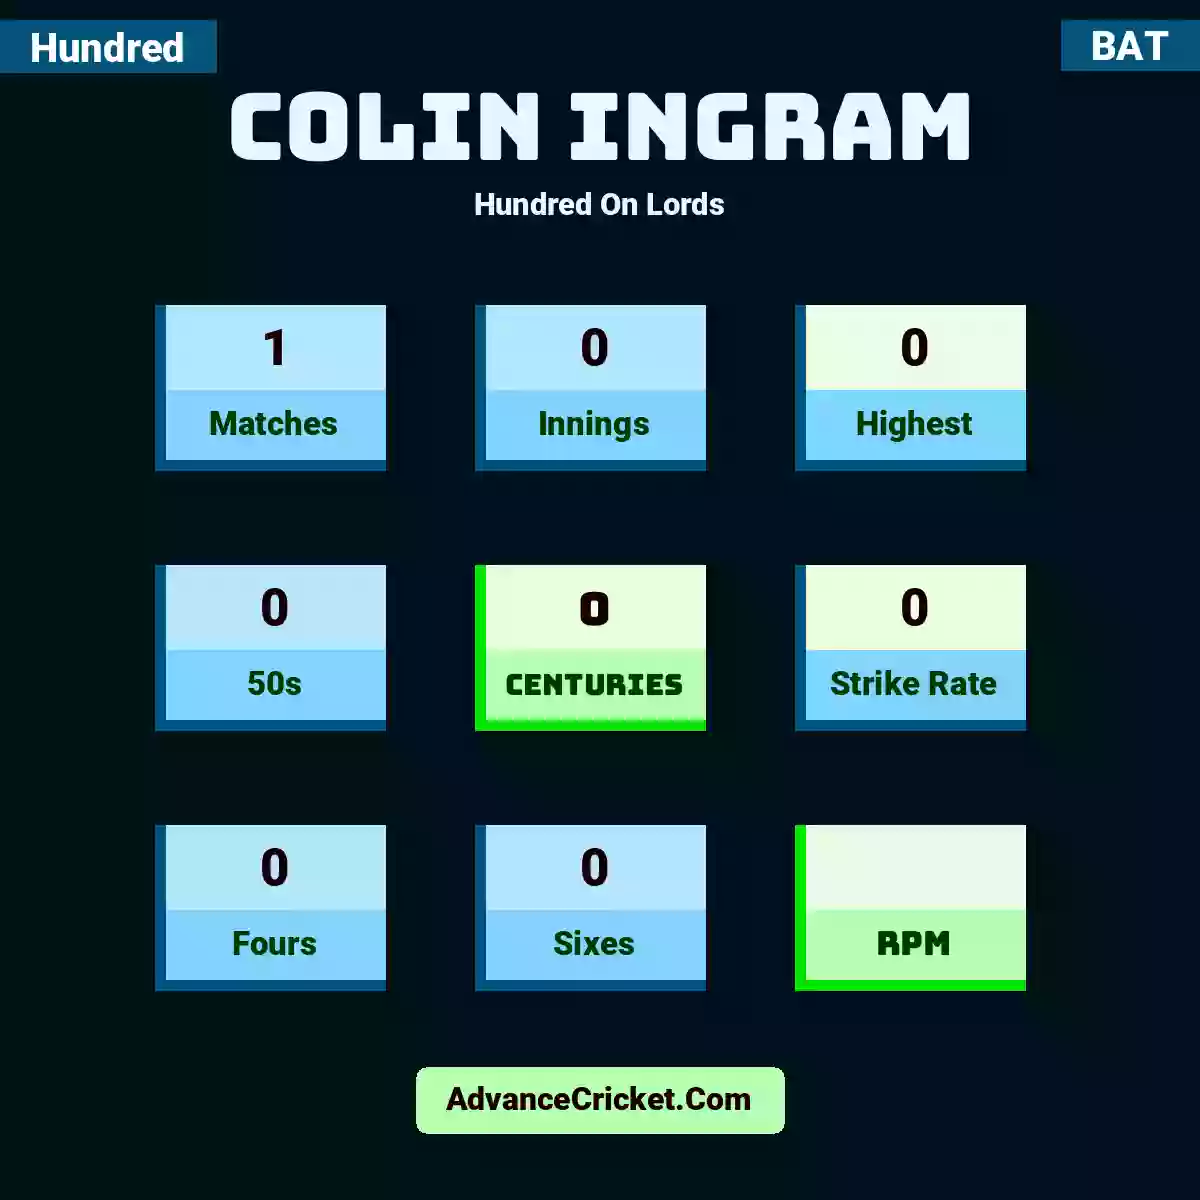 Colin Ingram Hundred  On Lords, Colin Ingram played 1 matches, scored 0 runs as highest, 0 half-centuries, and 0 centuries, with a strike rate of 0. C.Ingram hit 0 fours and 0 sixes.